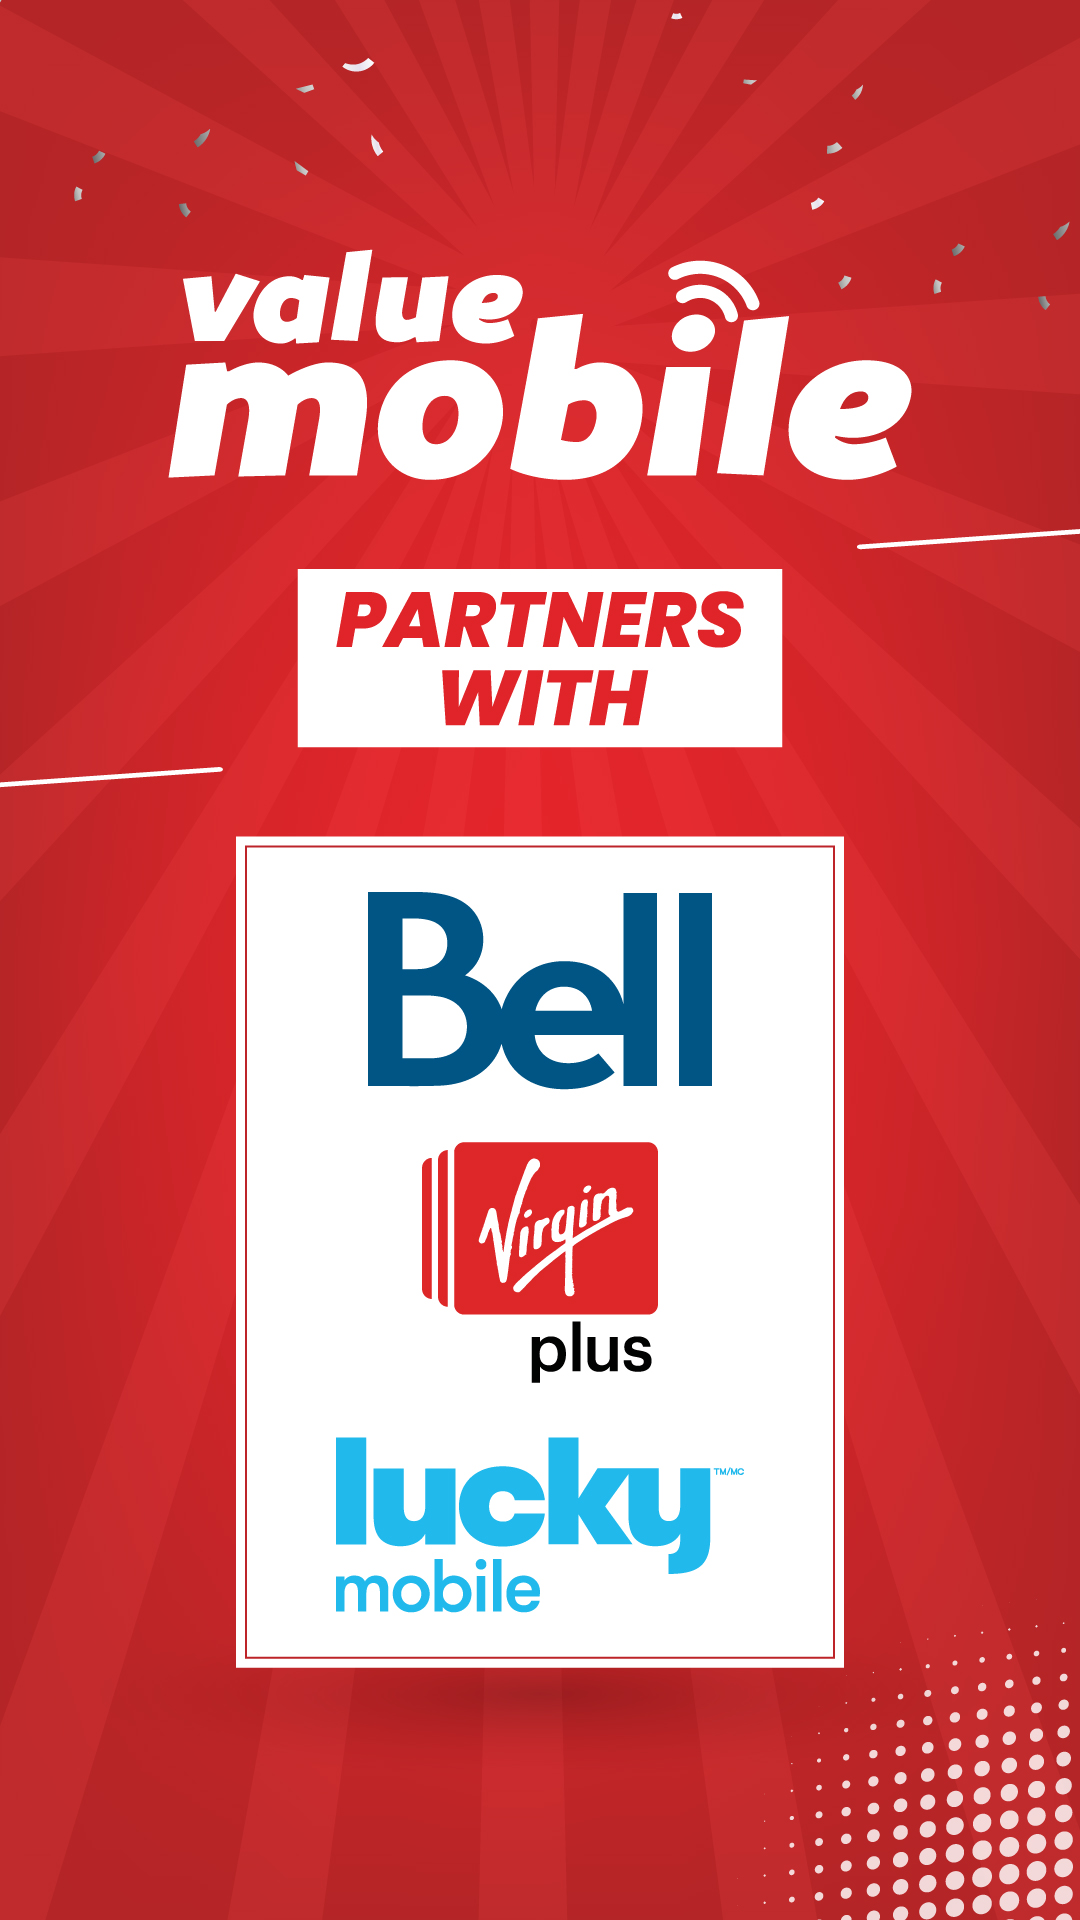 Value Mobile partners with Bell, Virgin Plus and Lucky Mobile!